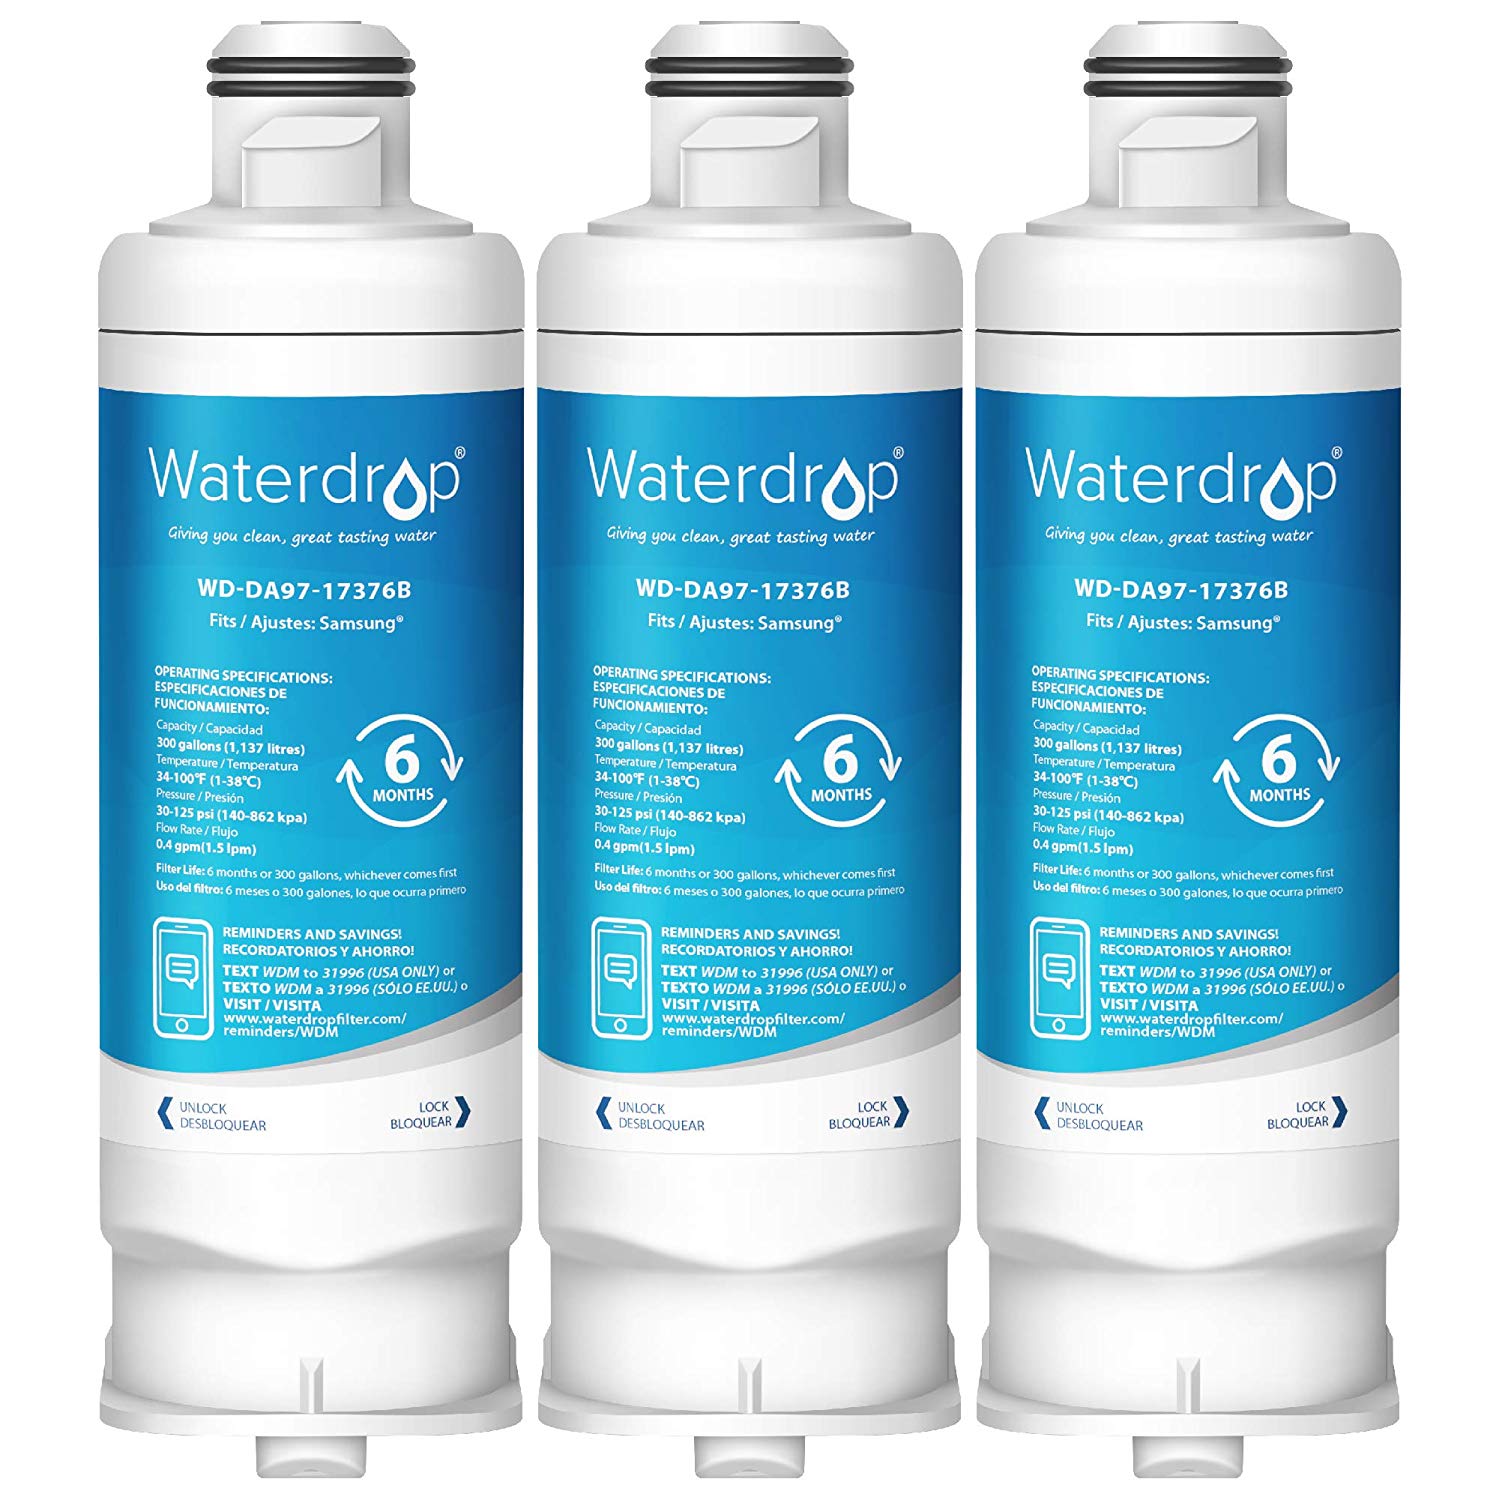 Things to Consider Before Purchasing a Water Filter